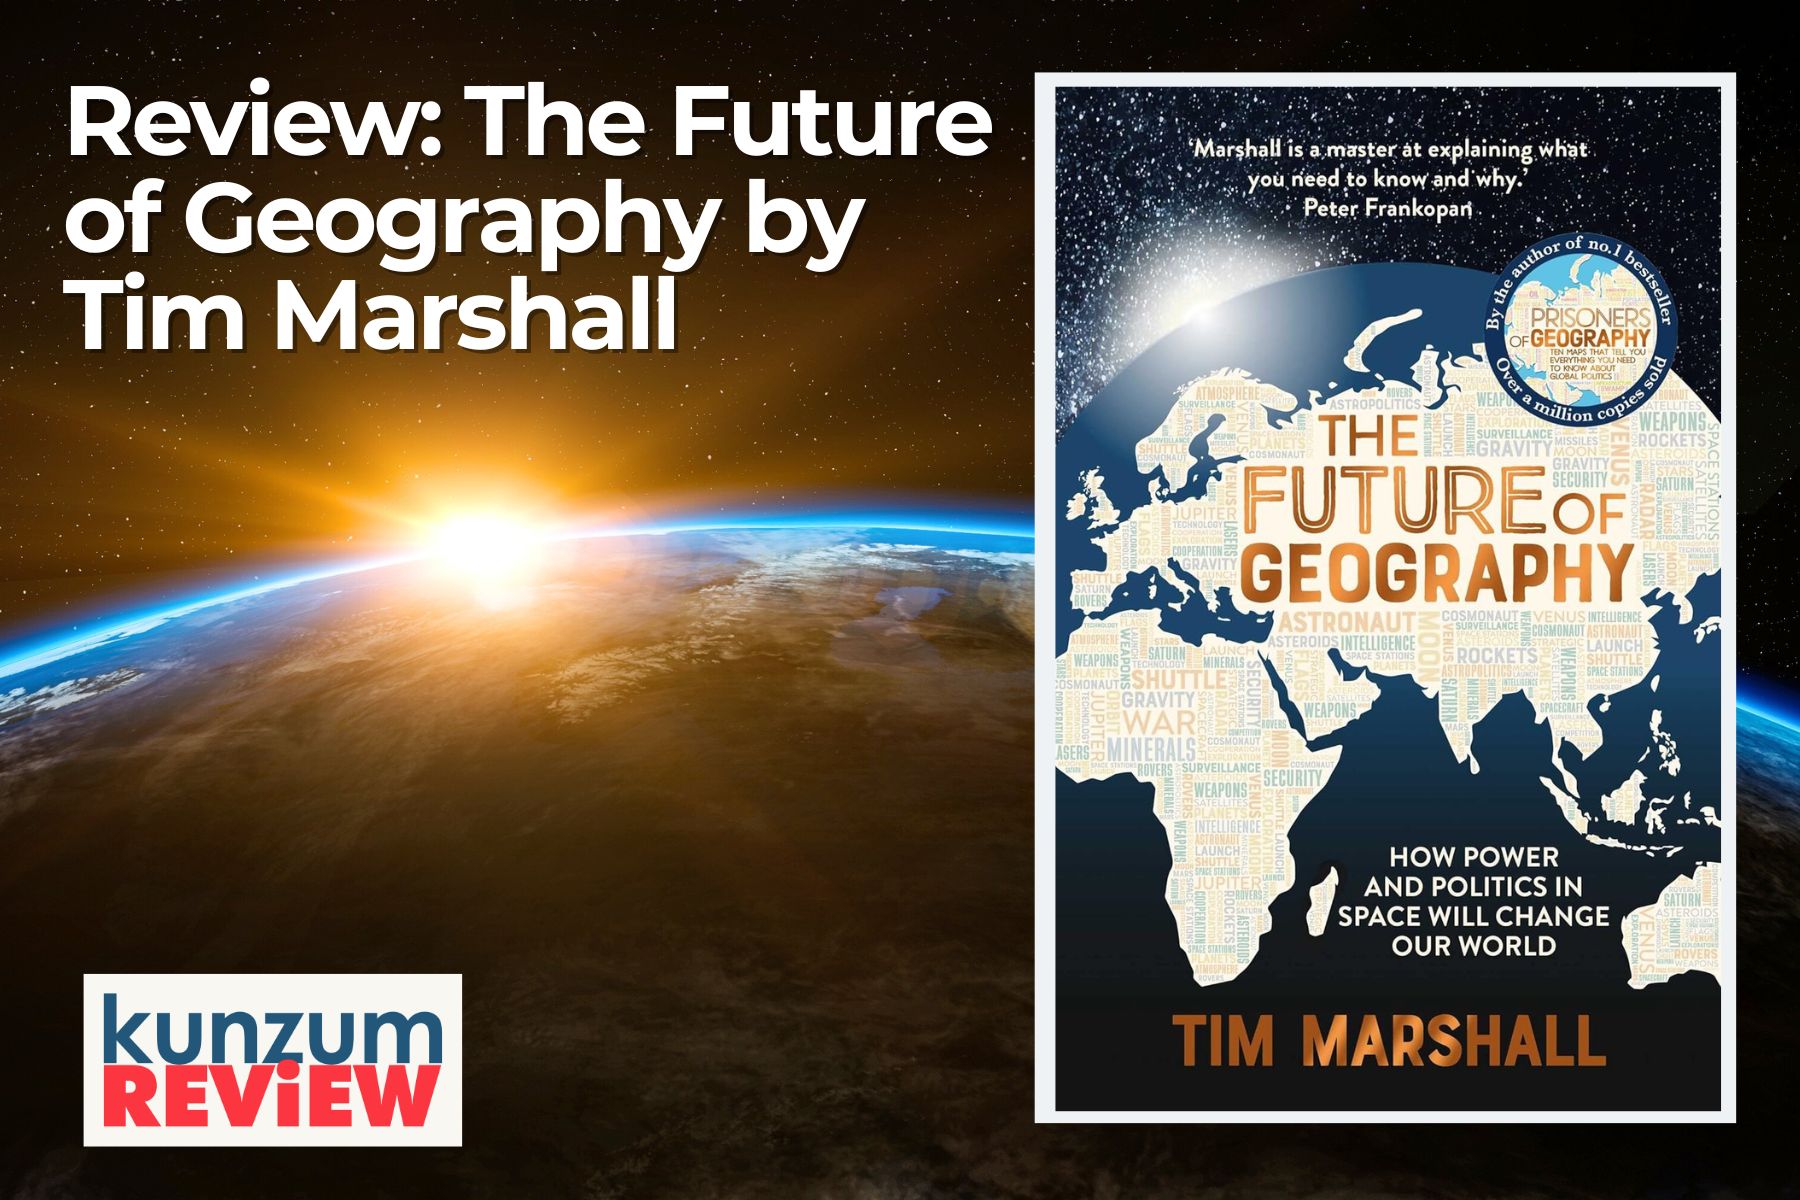 Book review | The Future of Geography: How Power and Politics in Space Will Change Our World